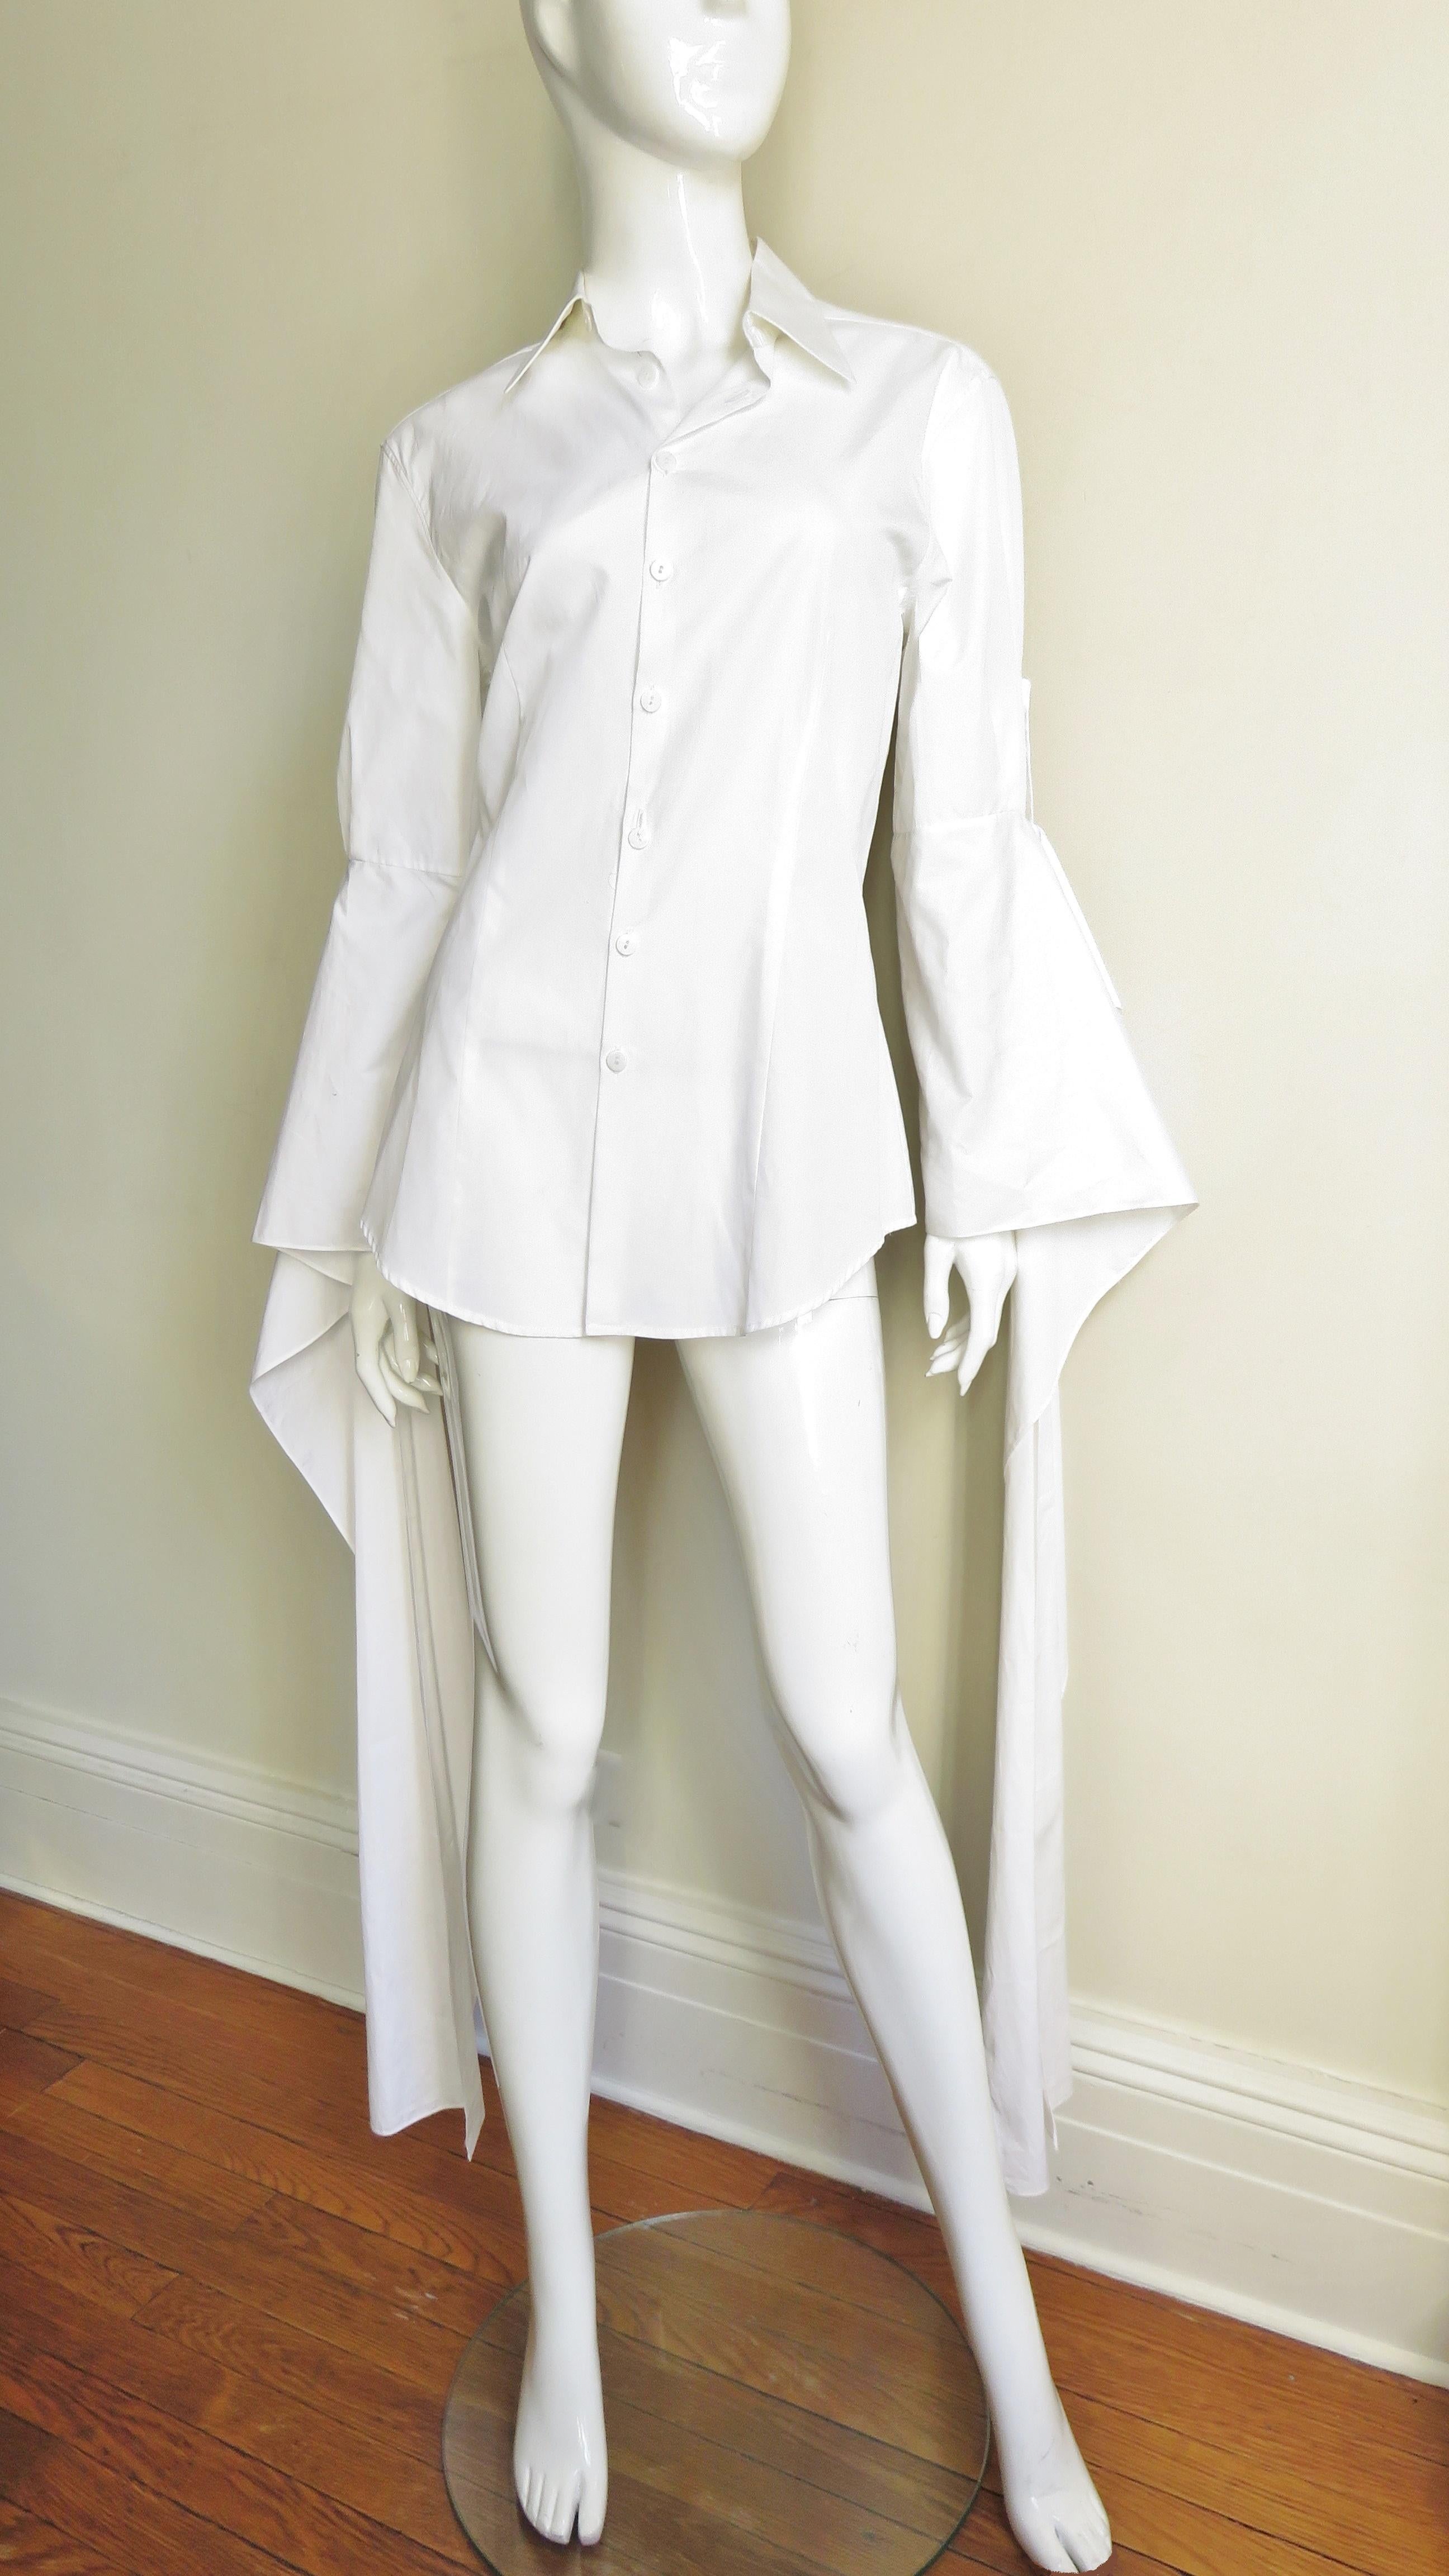 A fabulous white cotton shirt from Jean Paul Gaultier.  It has a shirt collar, mother of pearl buttons up front and long draping cuffs. The princess seaming makes for a great fit. Fabulous!  
Fits sizes Small, Medium.

Bust  40